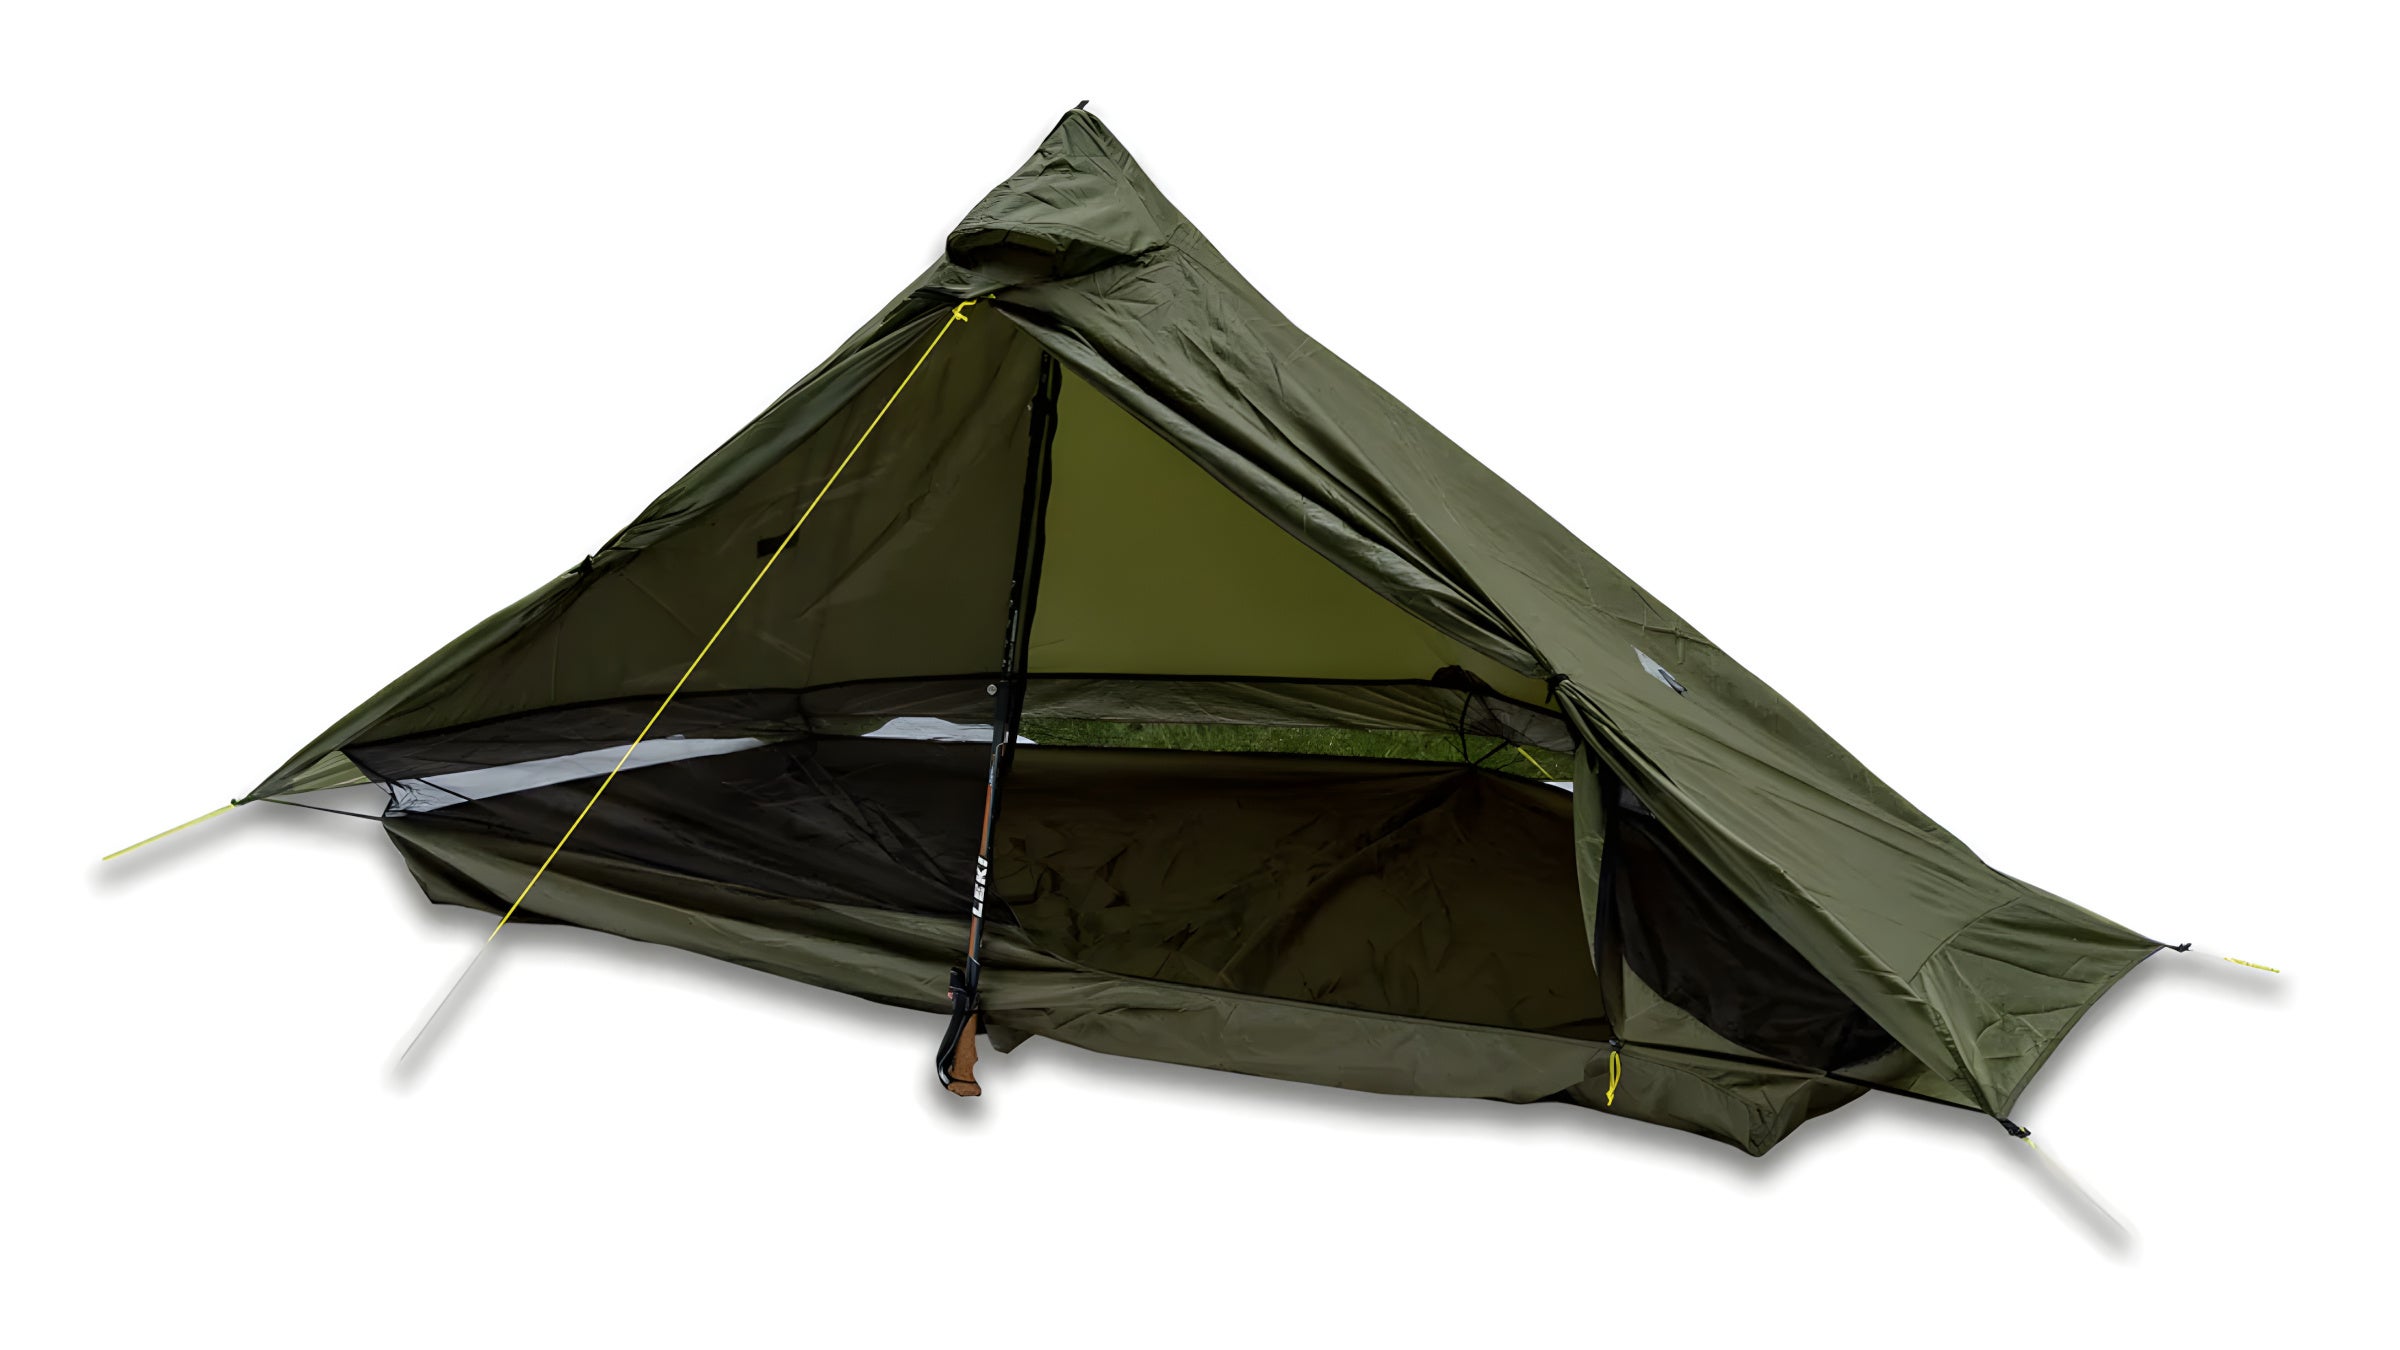 Should You Buy a Trekking Pole Tent? - Backpacker